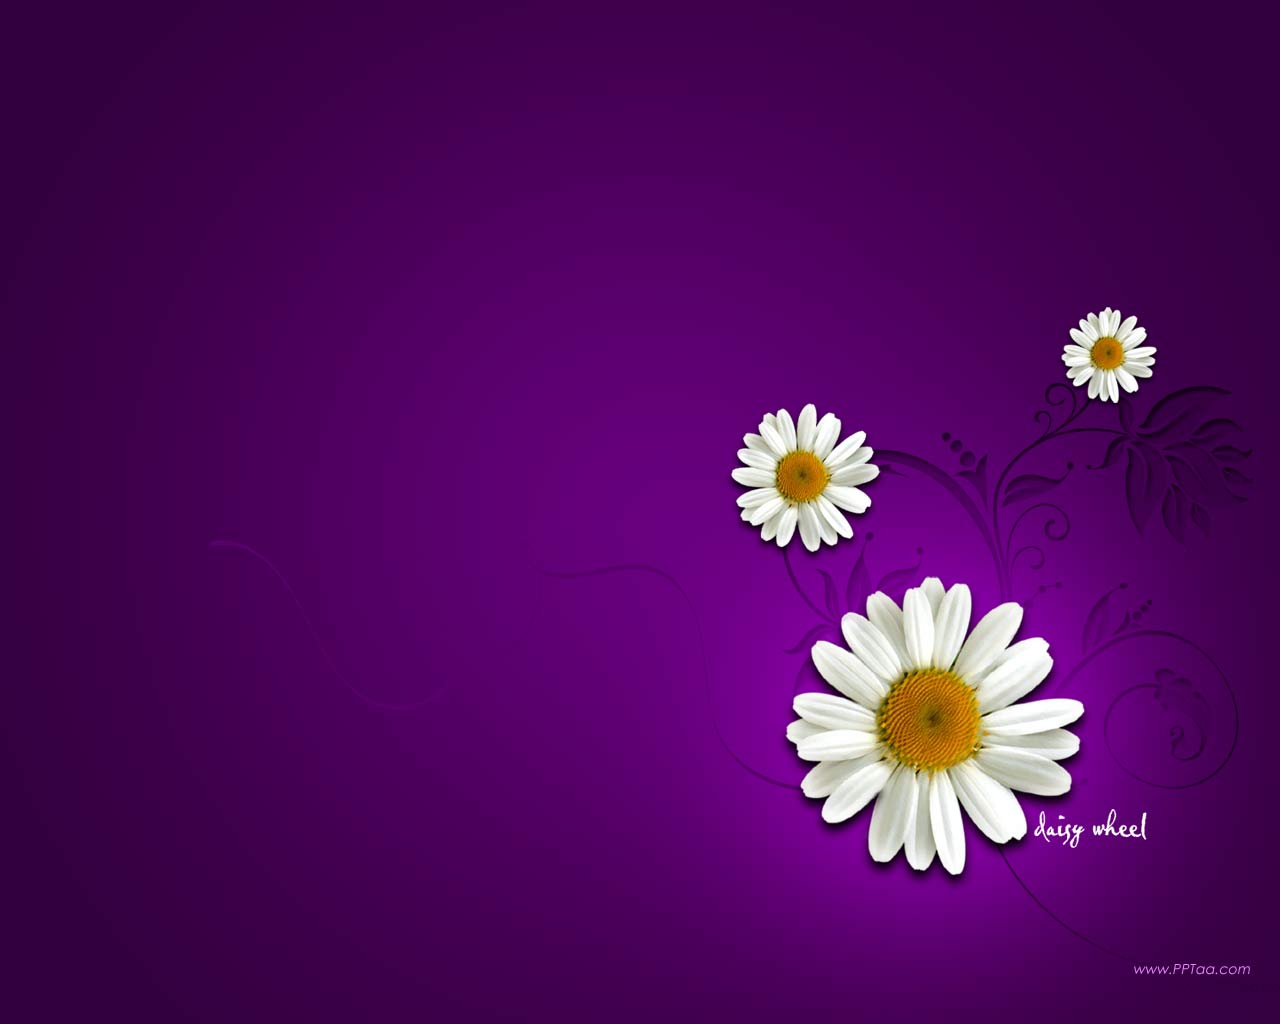 Daisy Wheel Computer Wallpapers For Background 1280x1024